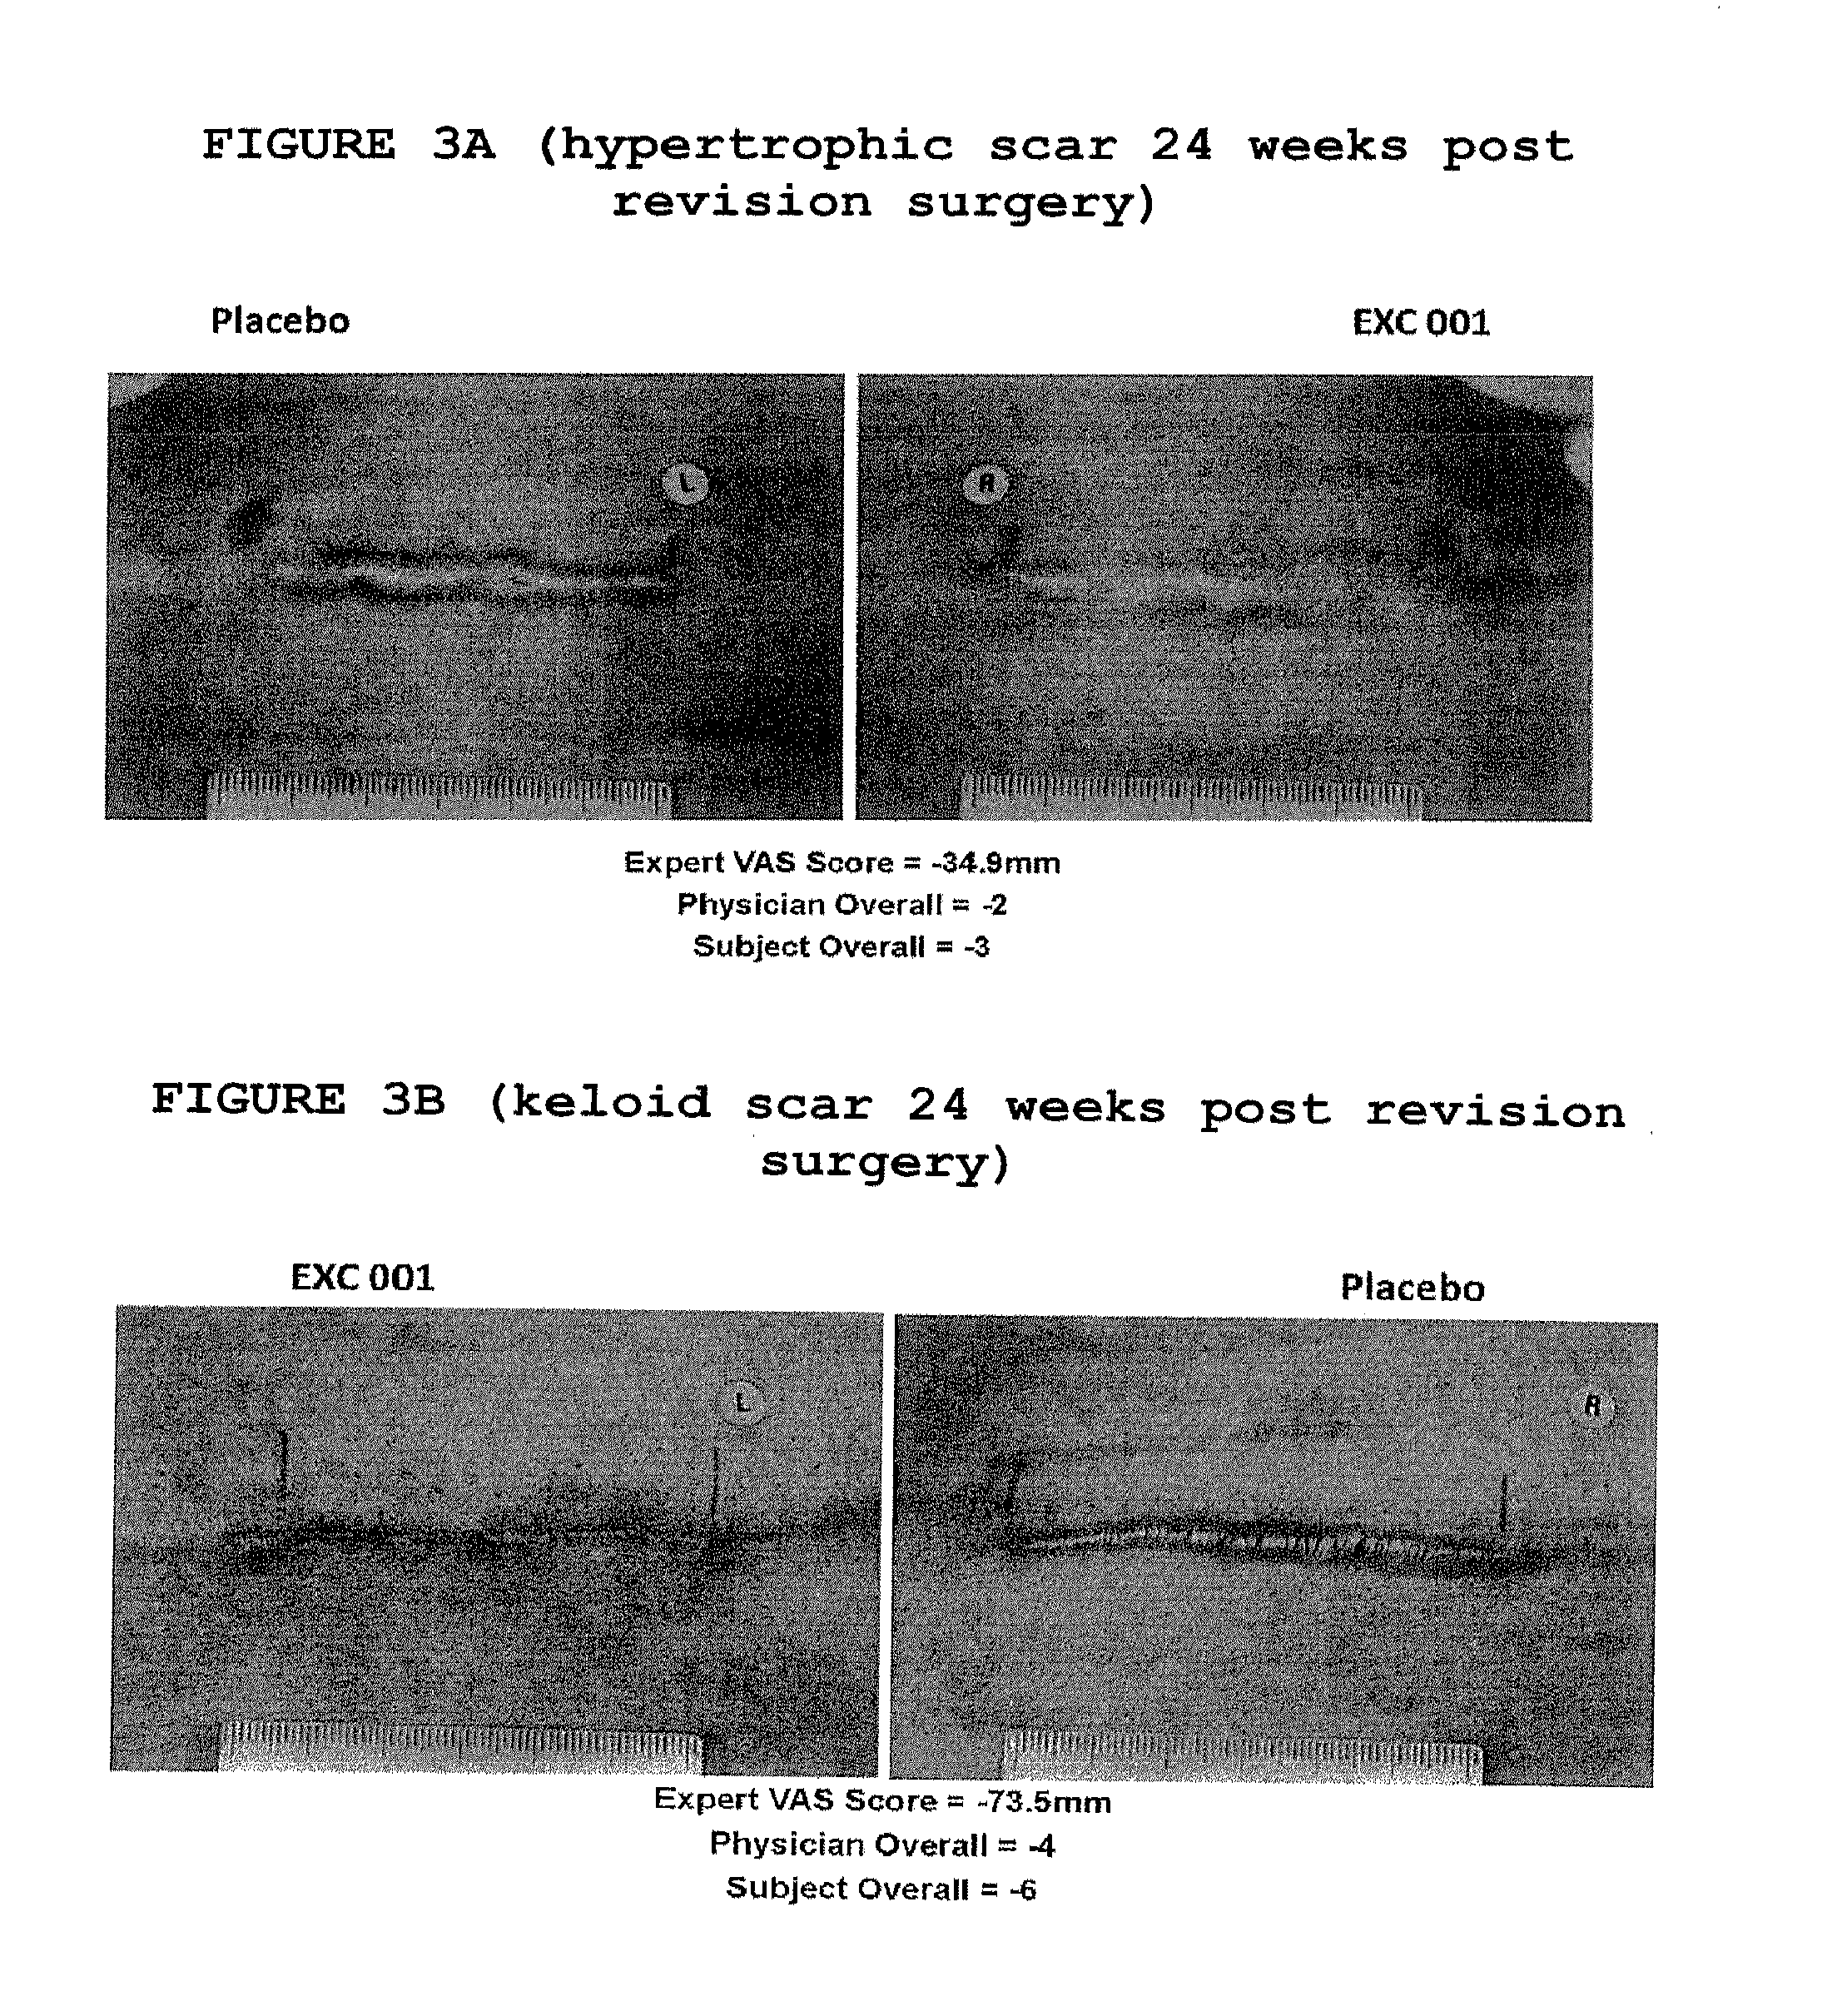 Method of treating keloids or hypertrophic scars using antisense compounds targeting connective tissue growth factor (CTGF)